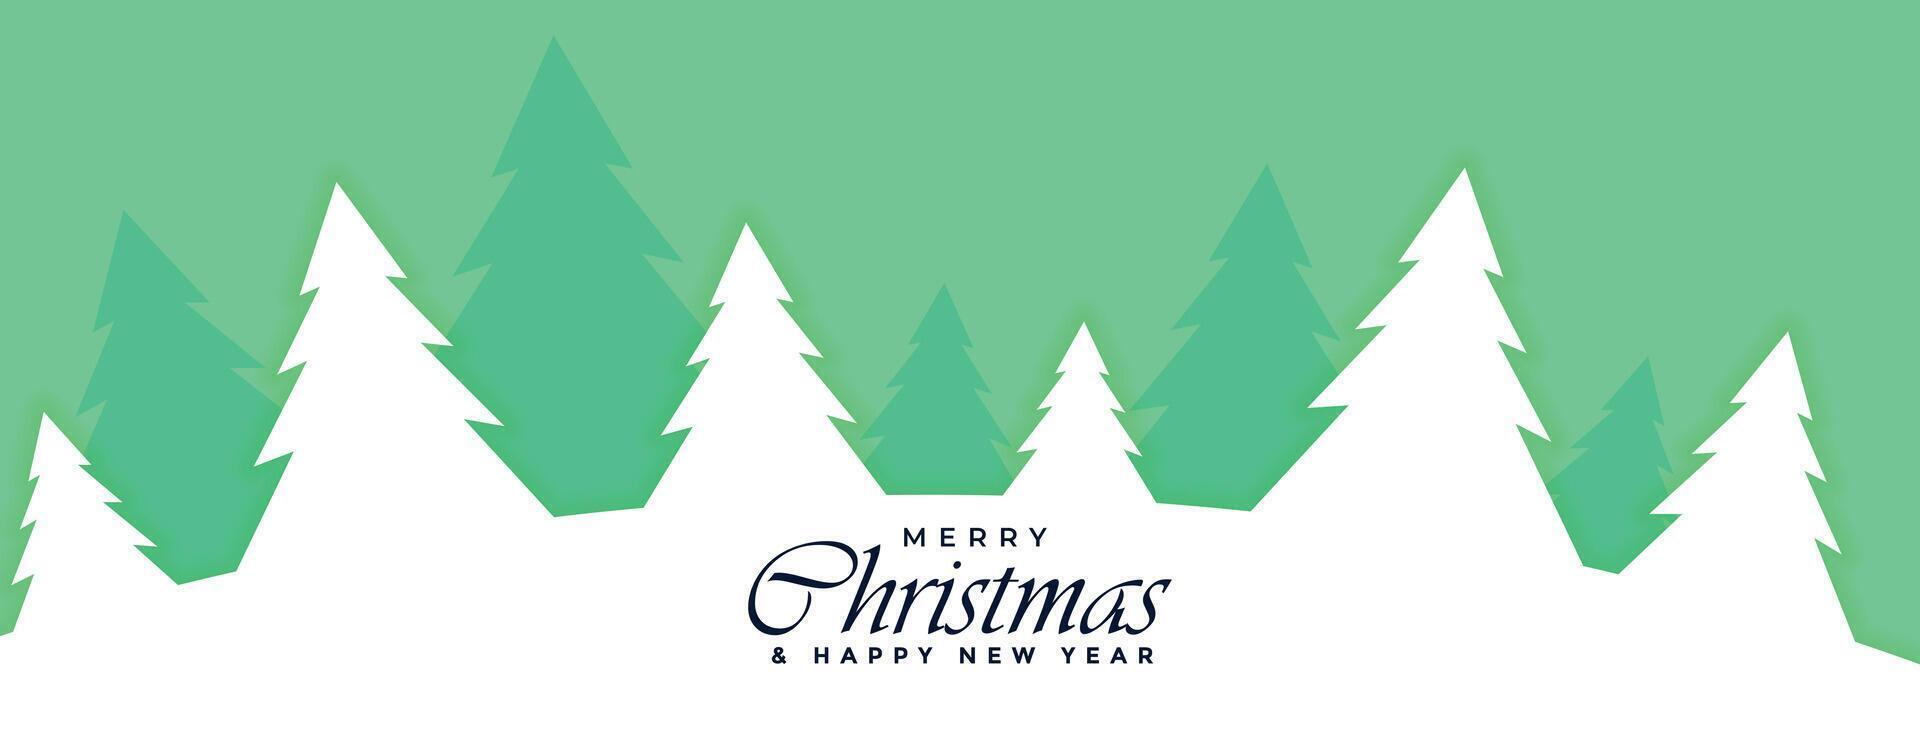 flat merry christmas banner with xmas trees vector